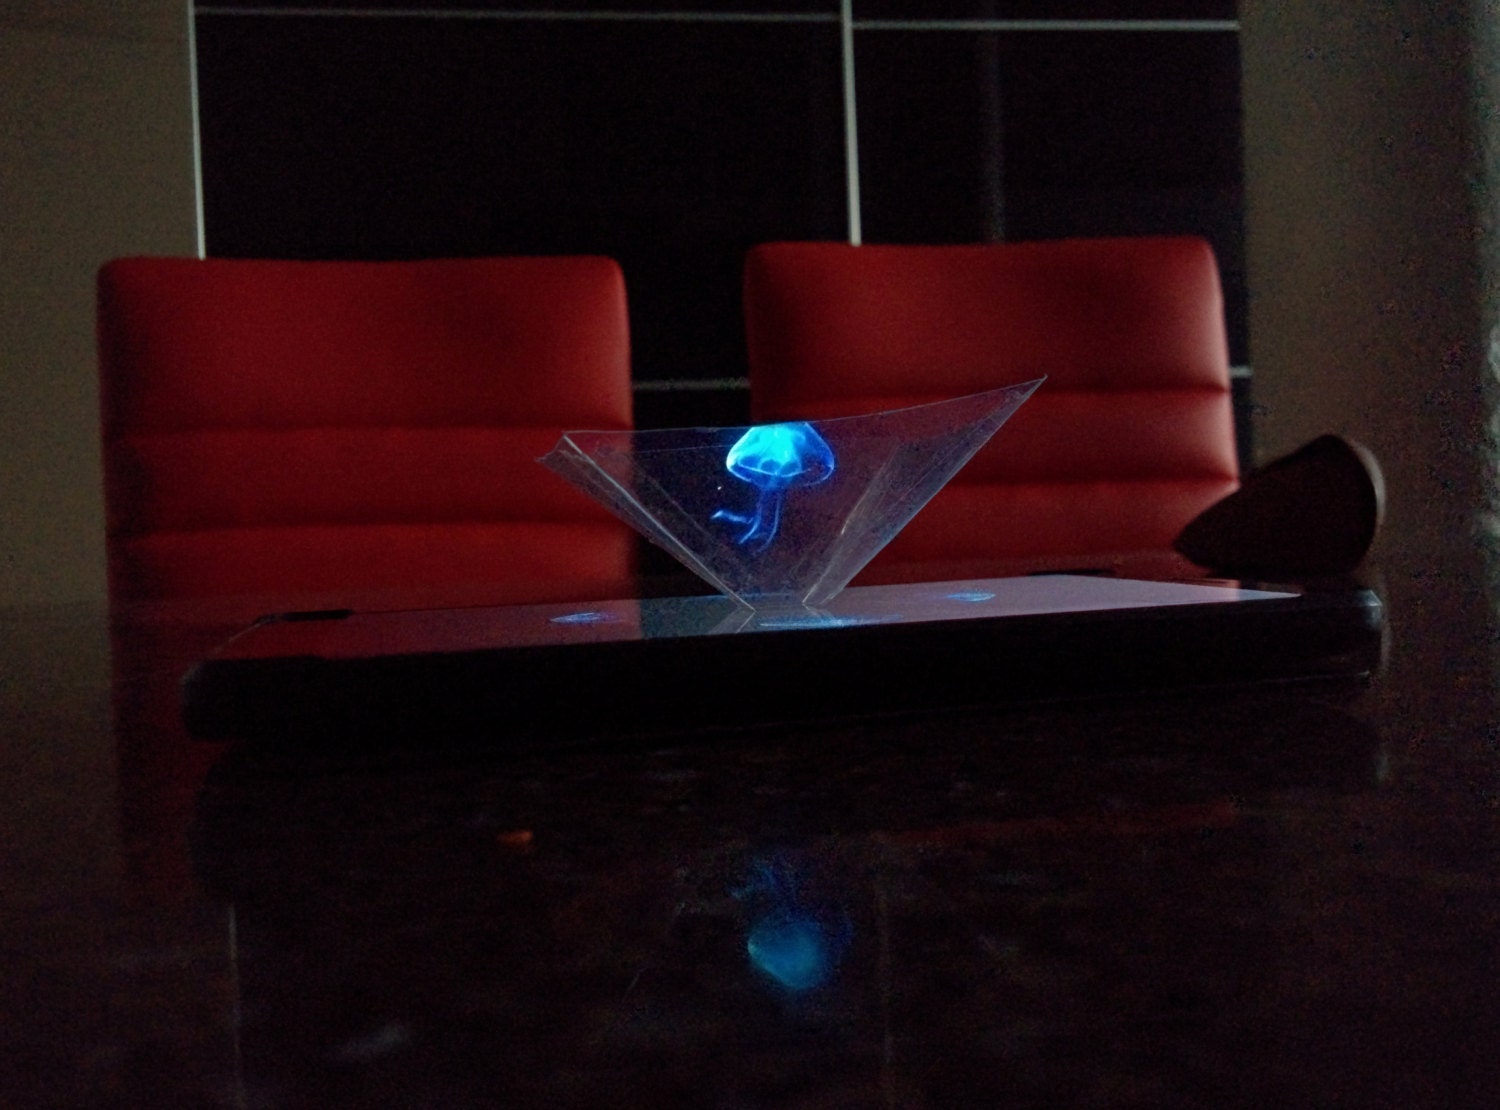 iphone hologram projector